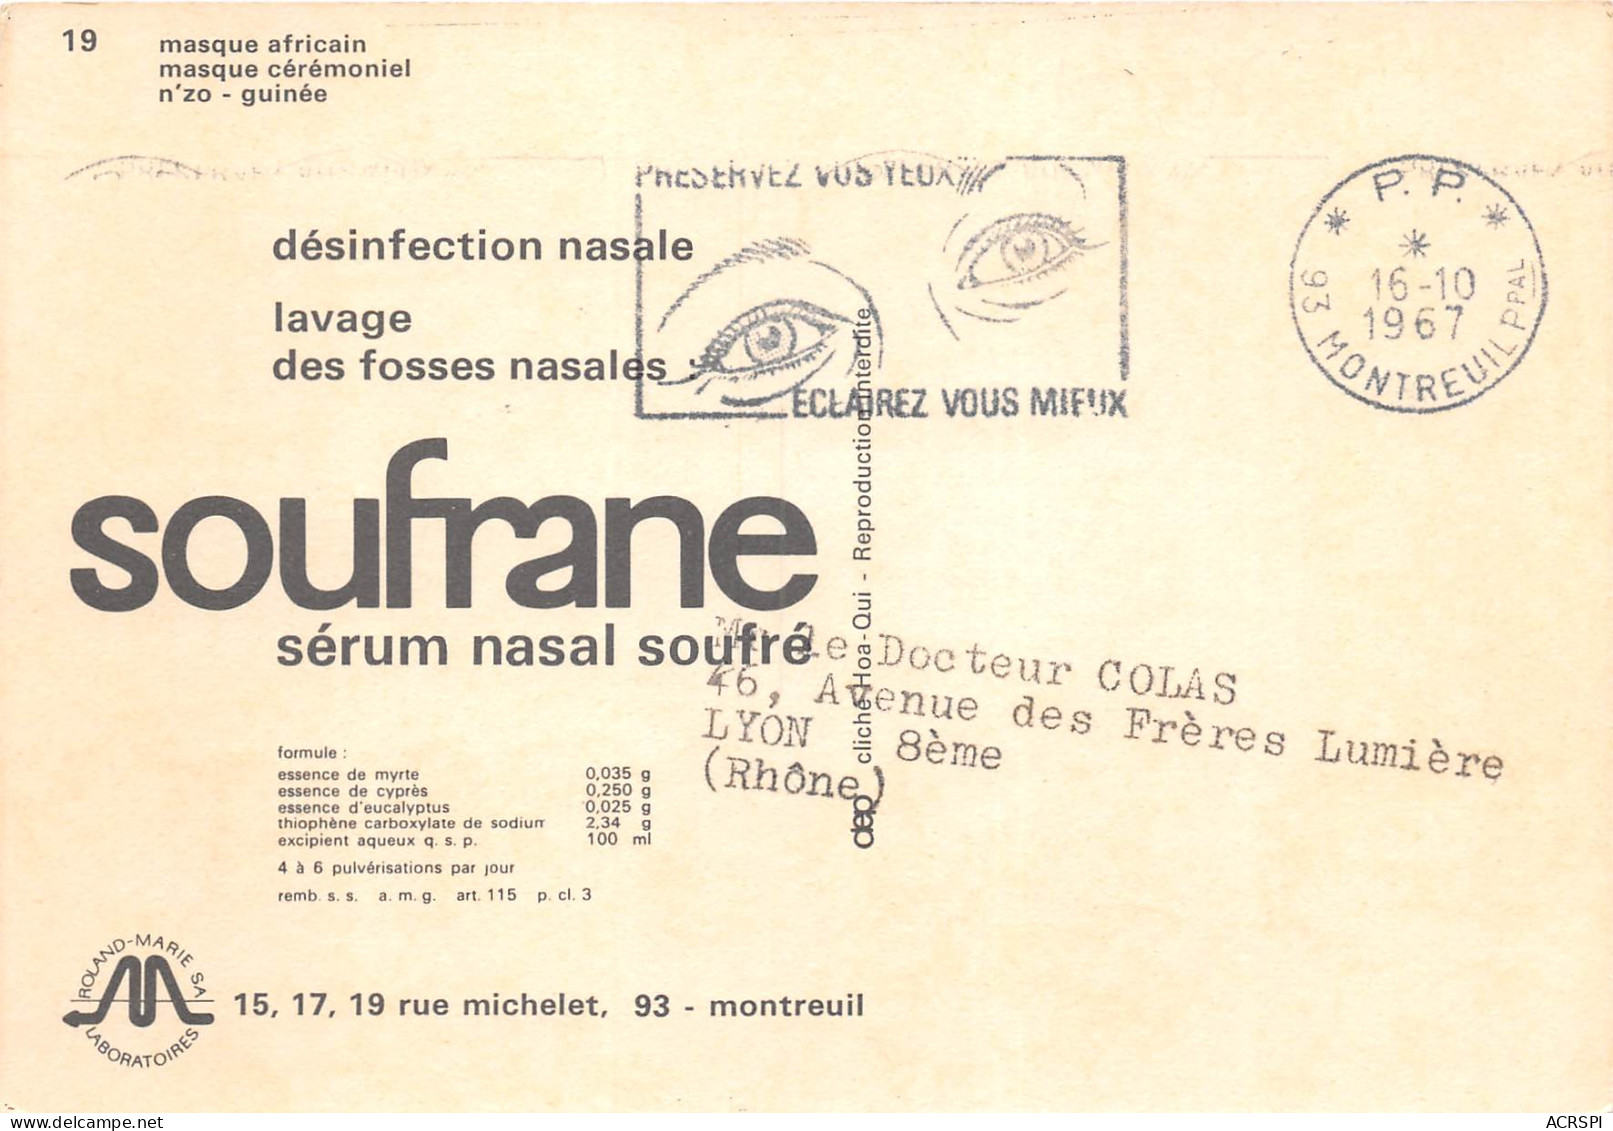 GUINEE Francaise  Masque Ceremoniel N'ZO   9 (scan Recto-verso) PFRCR00076 P - French Guinea